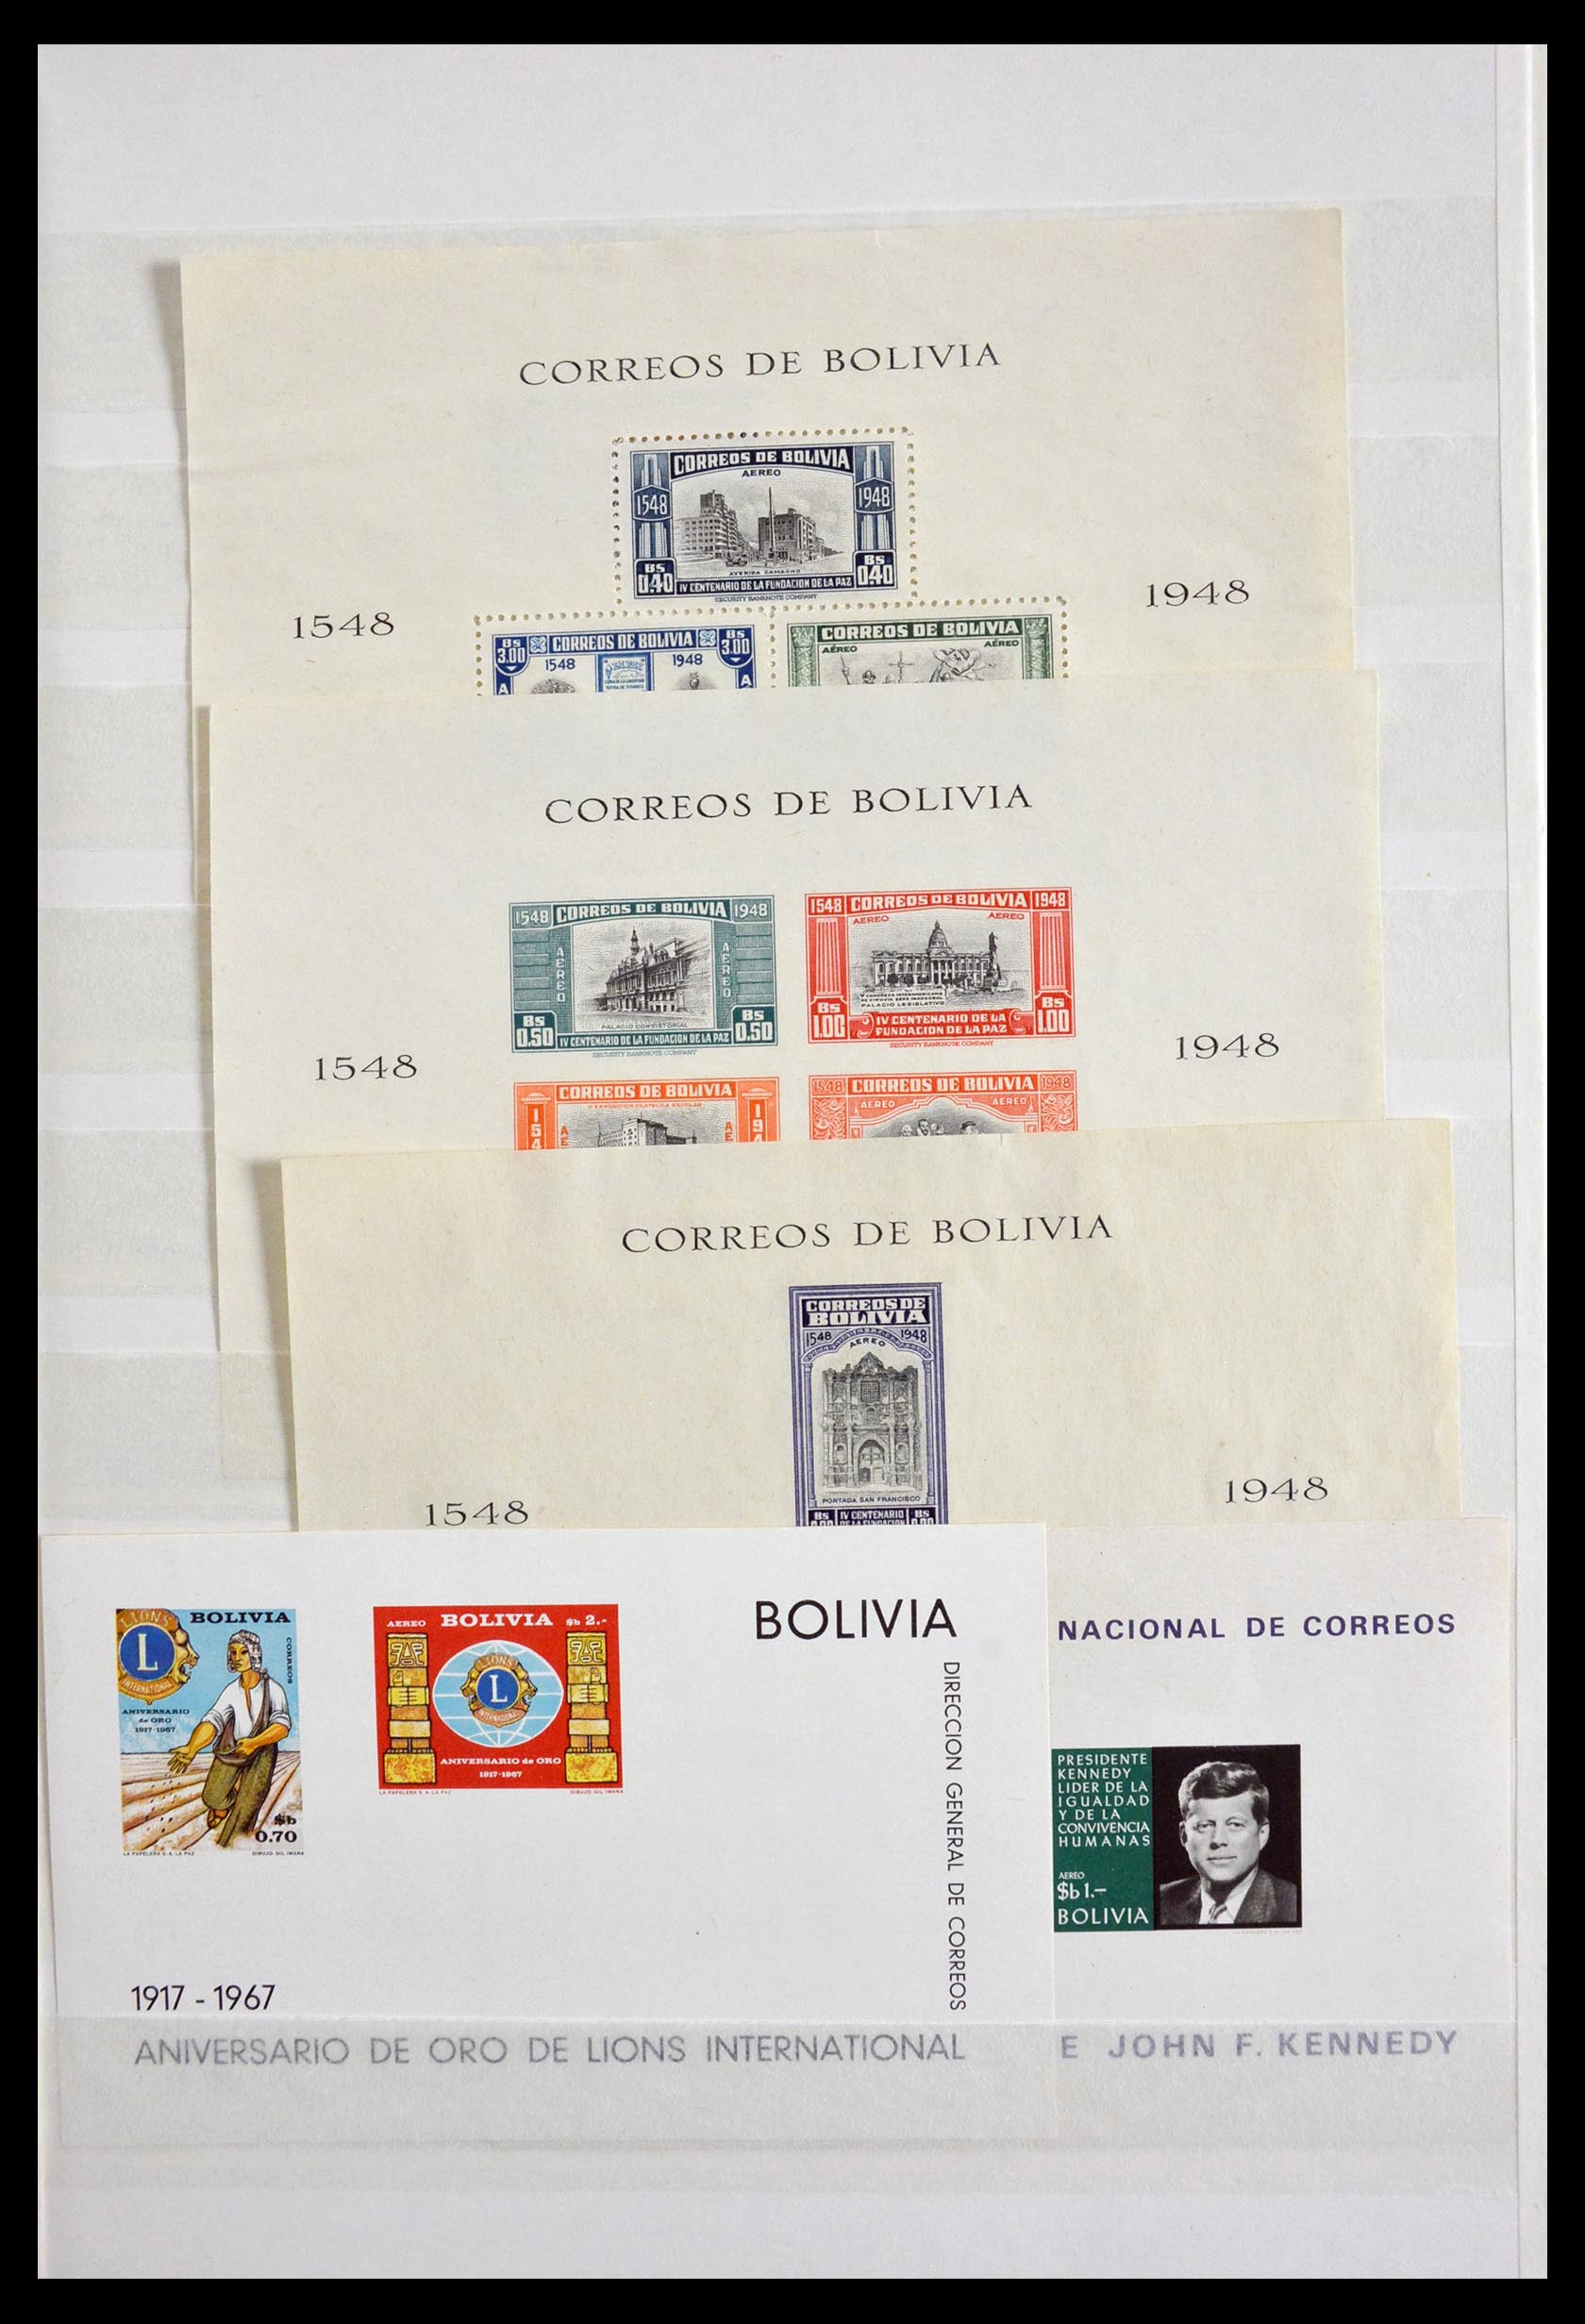 29917 025 - 29917 Latin America airmail stamps.